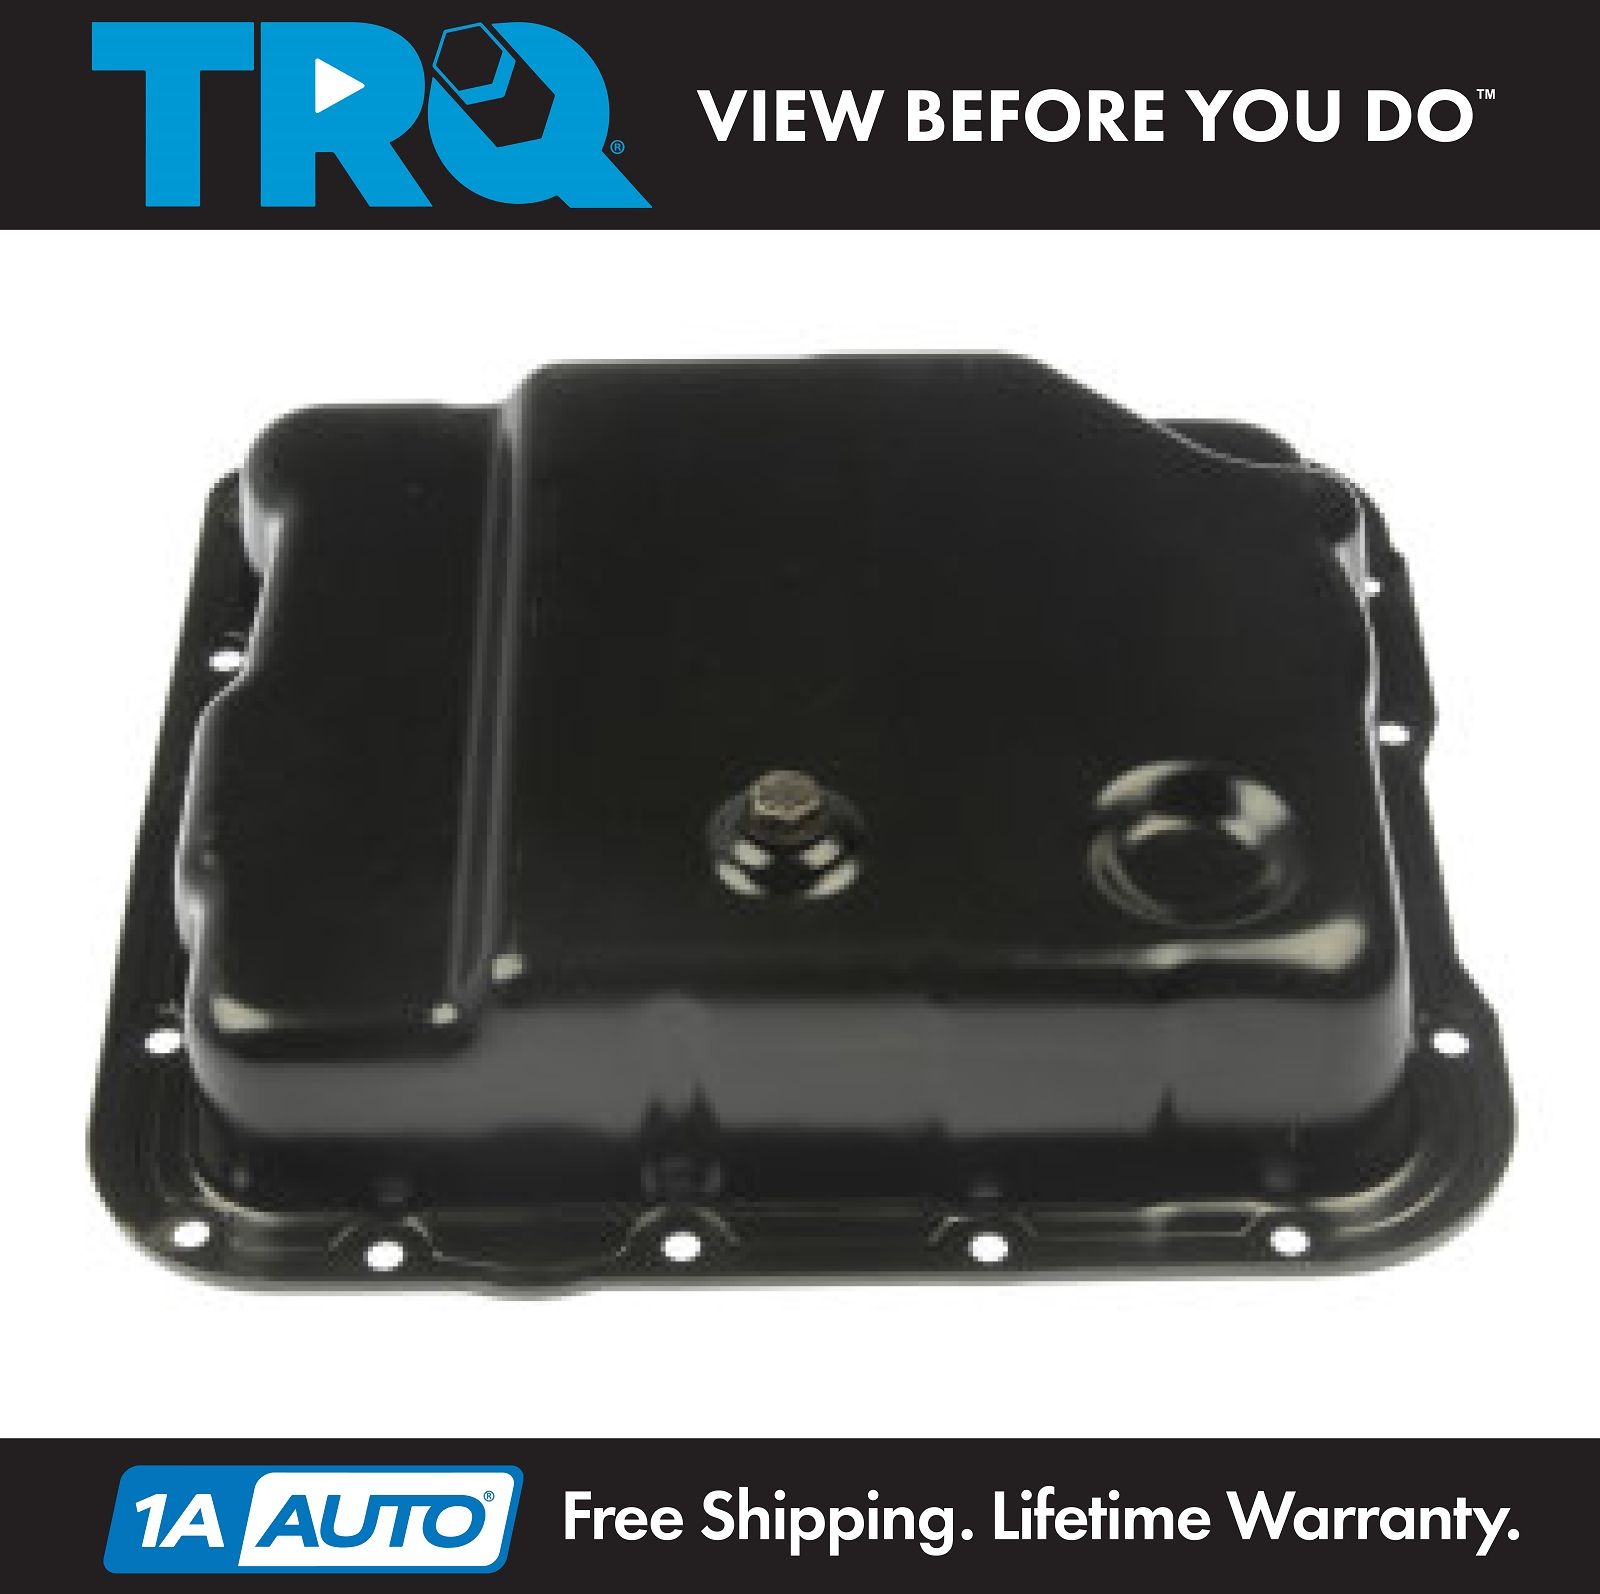 2003-04 Hummer H2 Transmission Oil Pan for Models with 4L60E or 4L65E 4 Speed AT